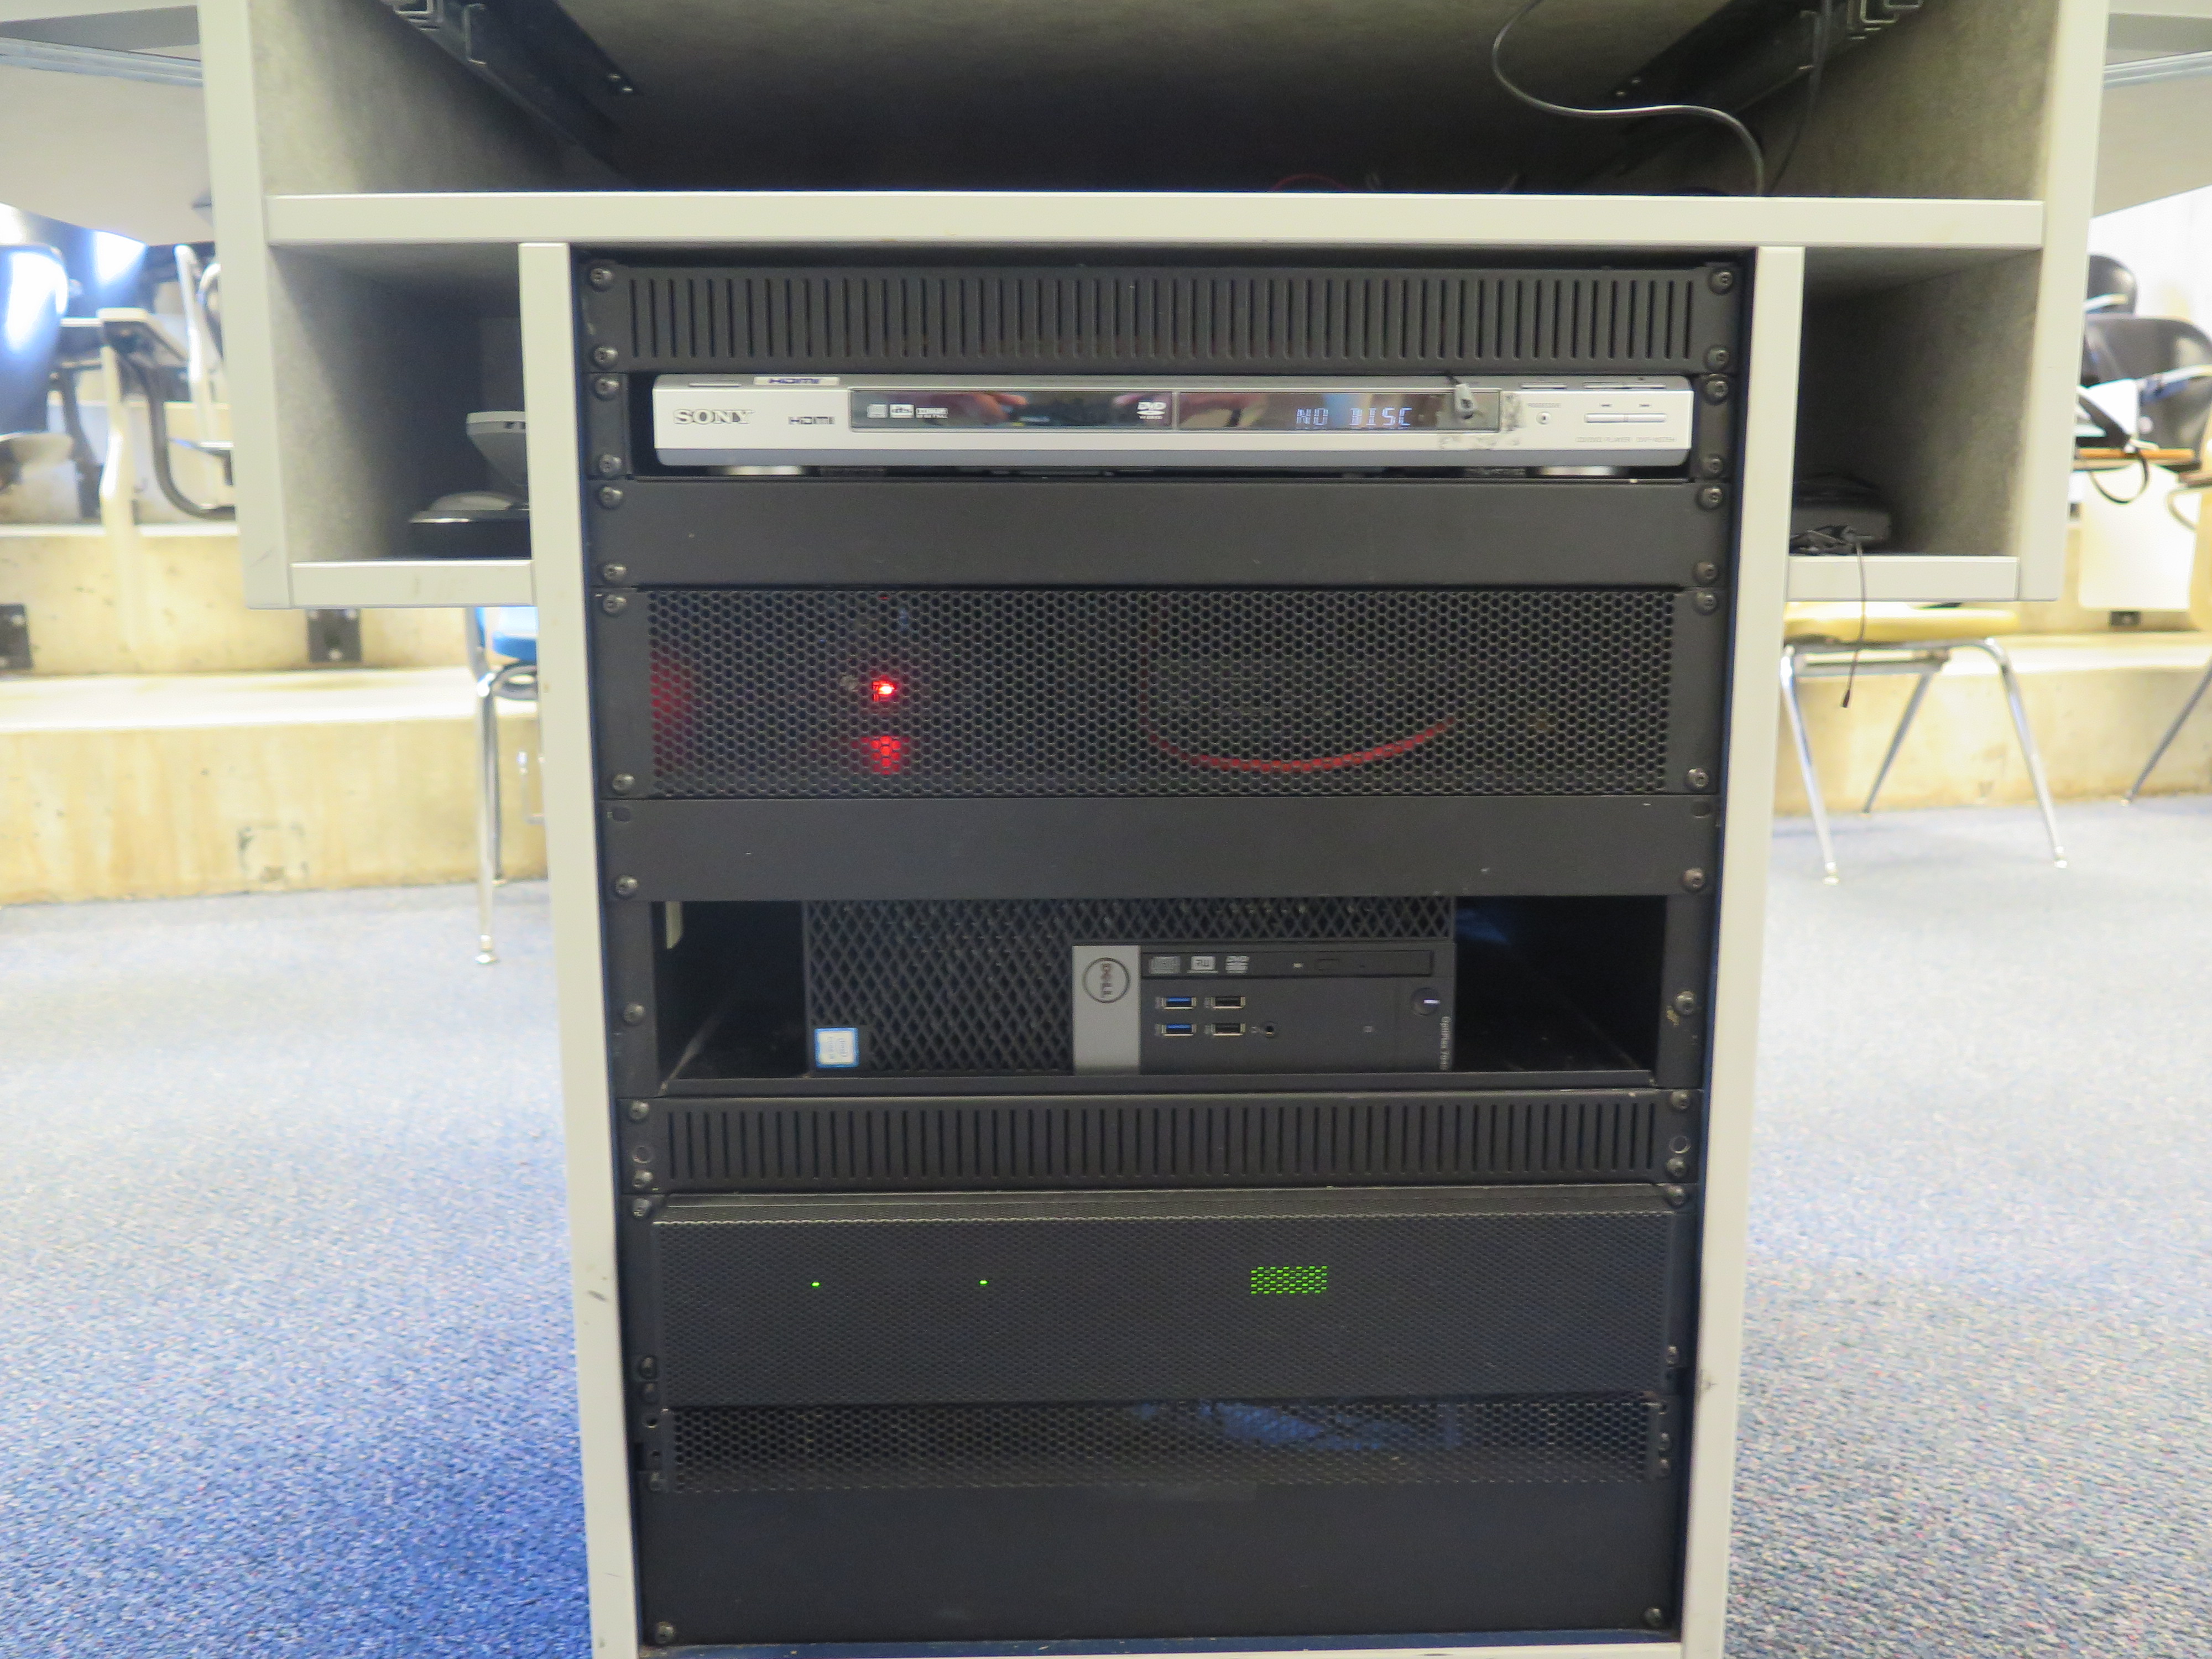 Front of Equipment rack showing DVD Player, Below that is the Dell Computer CPU.